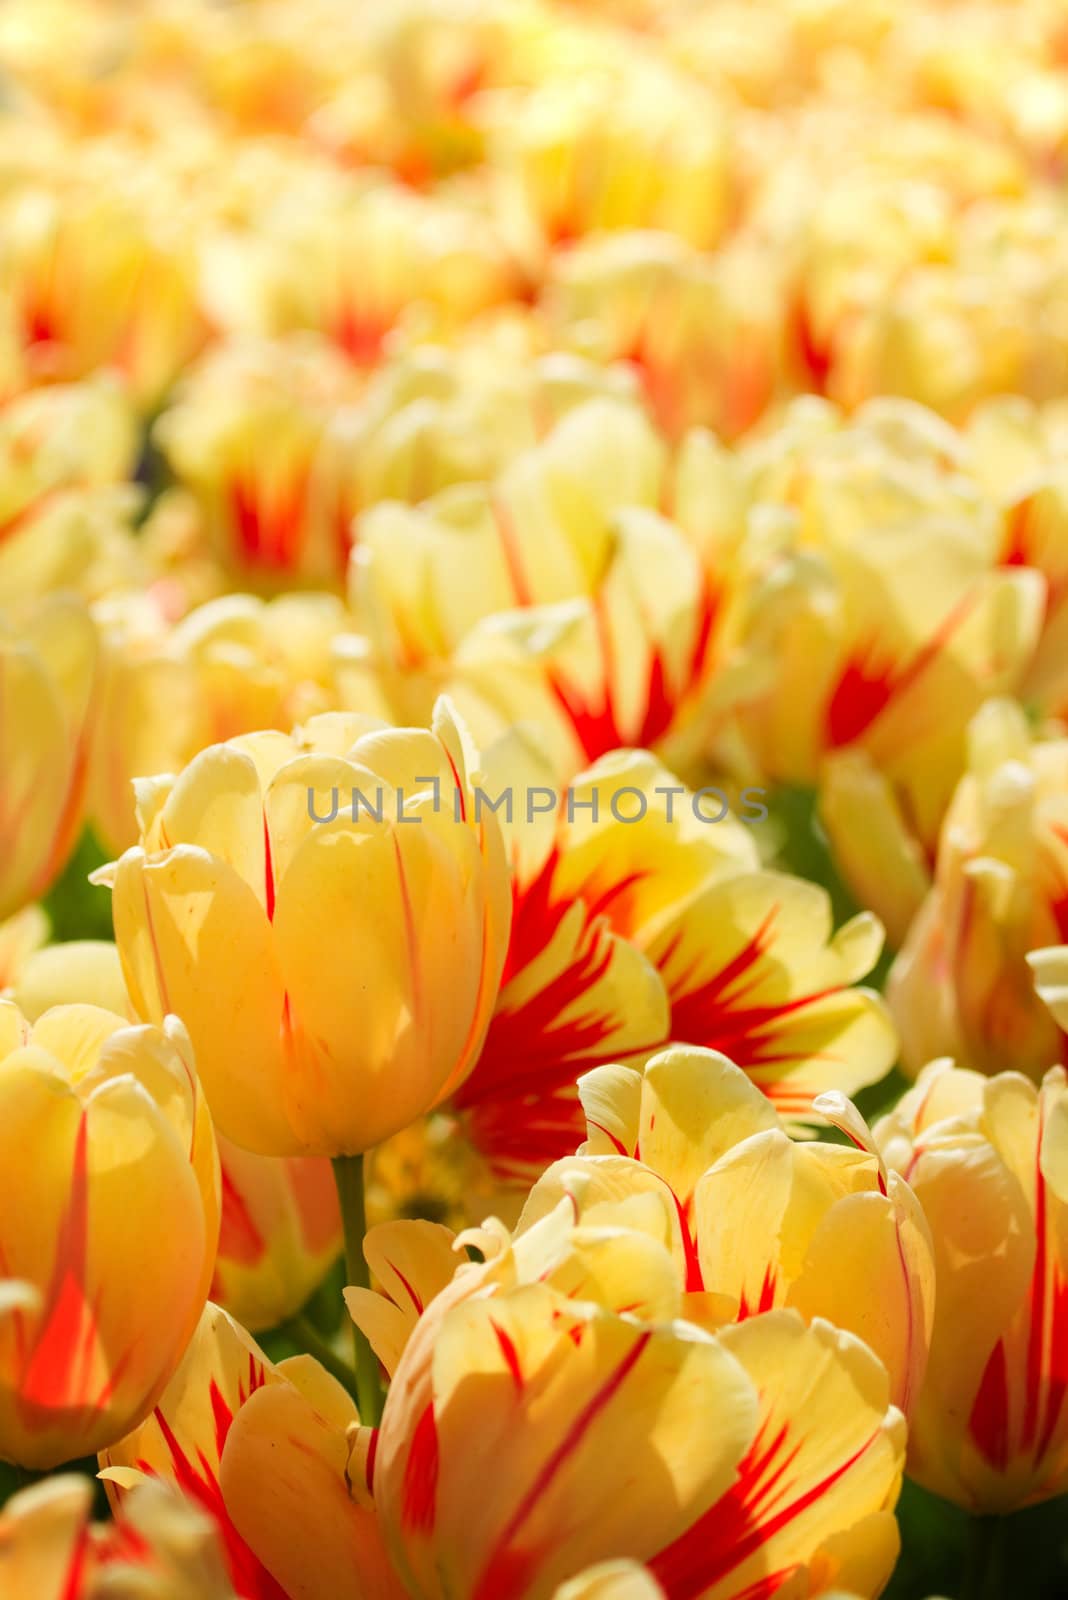 Yellow red flamed tulips in spring by Colette